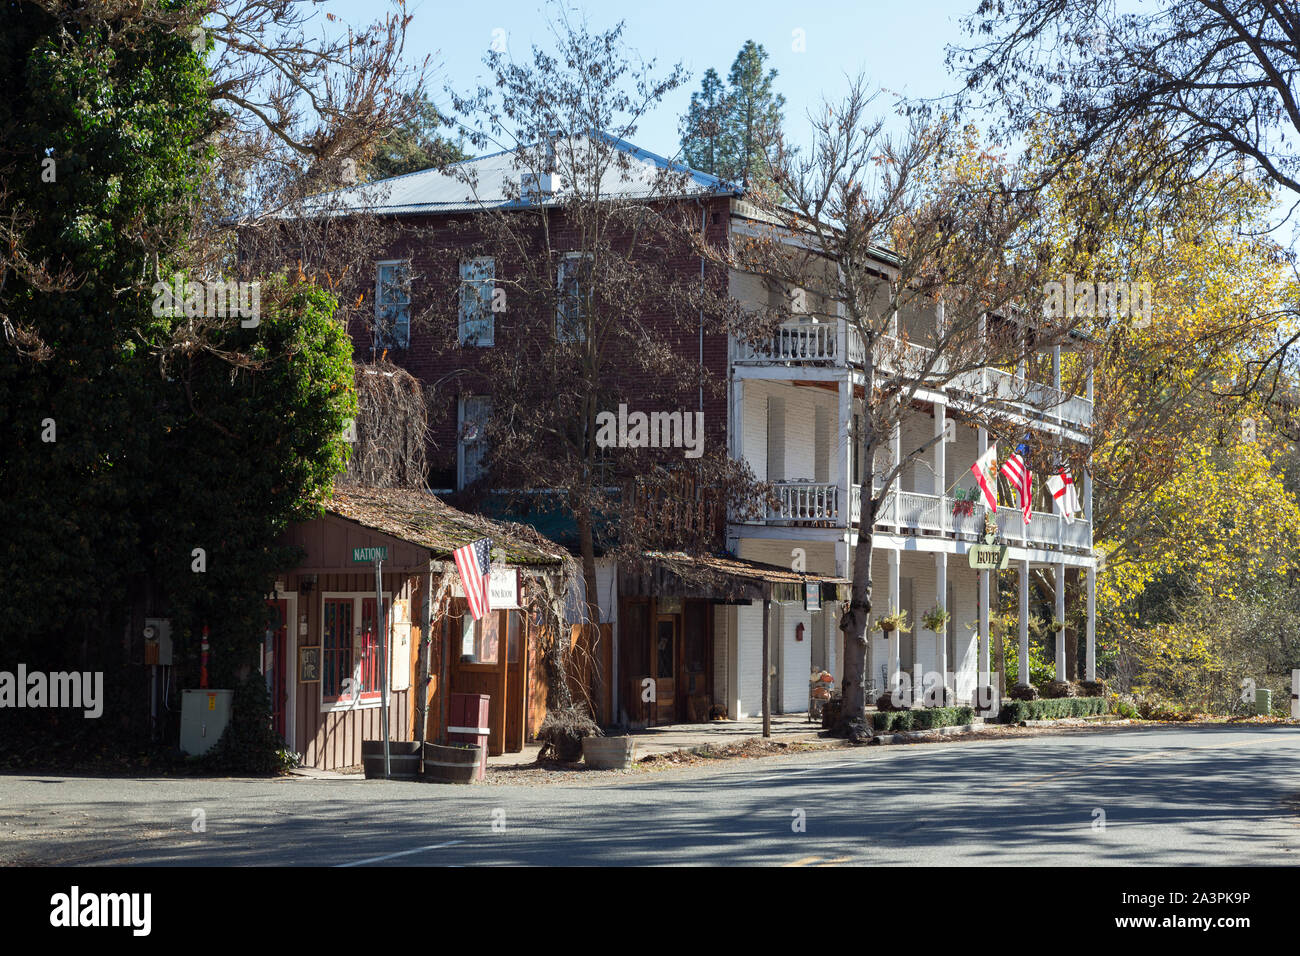 St. George Hotel, the largest structure in the town of Volcano in Amador County, California Stock Photo